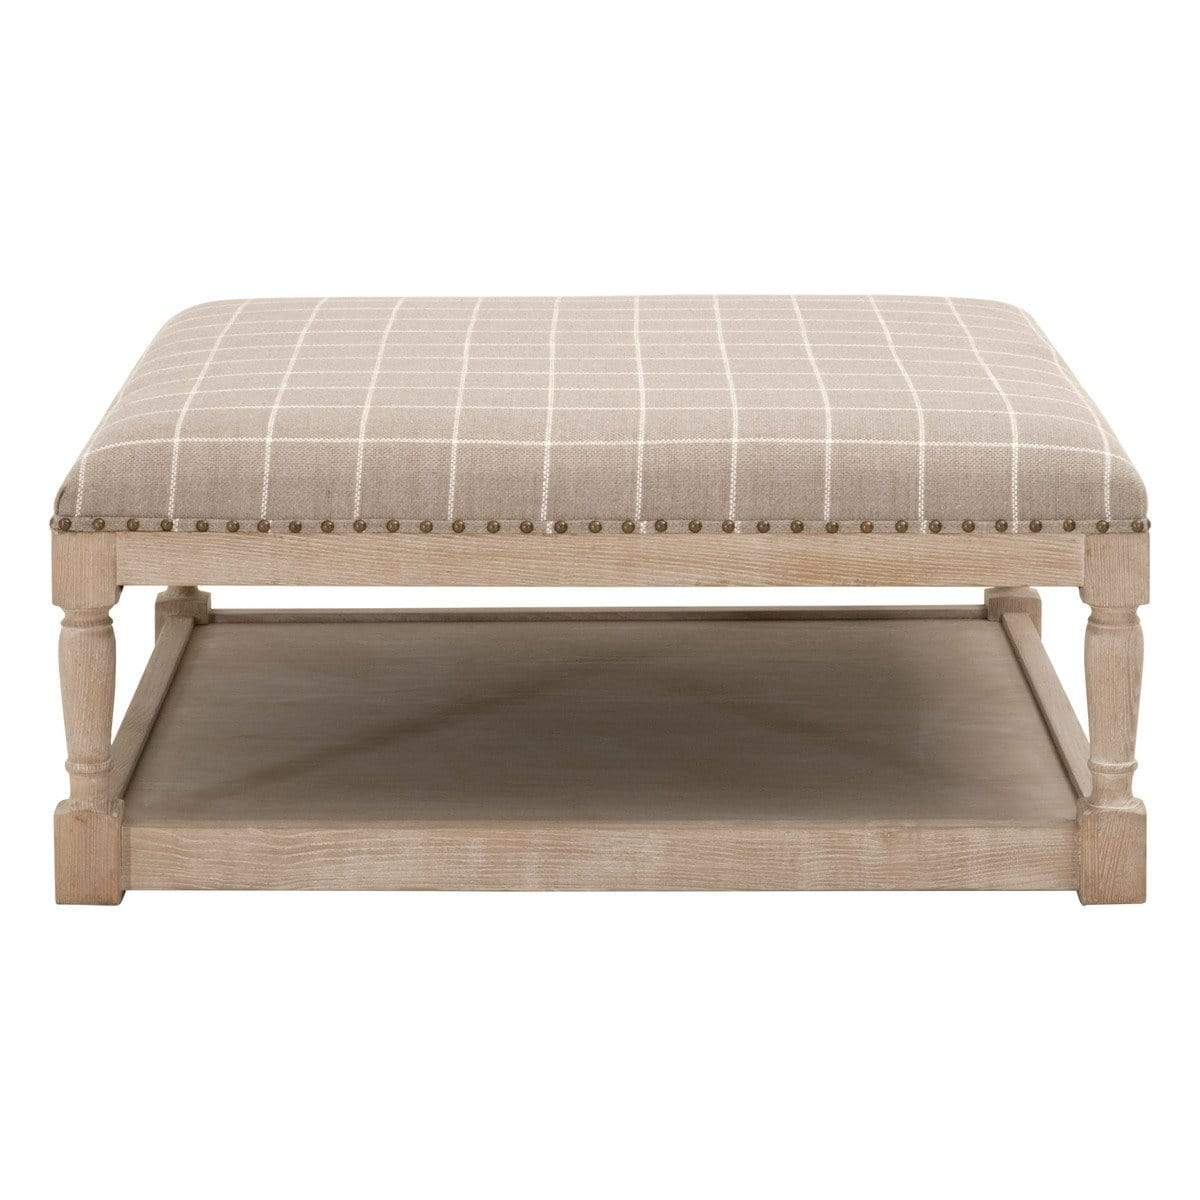 BLU Home Townsend Upholstered Coffee Table - Windowpane Pebble Furniture orient-express-6429UP.WPEB-GLD/NG